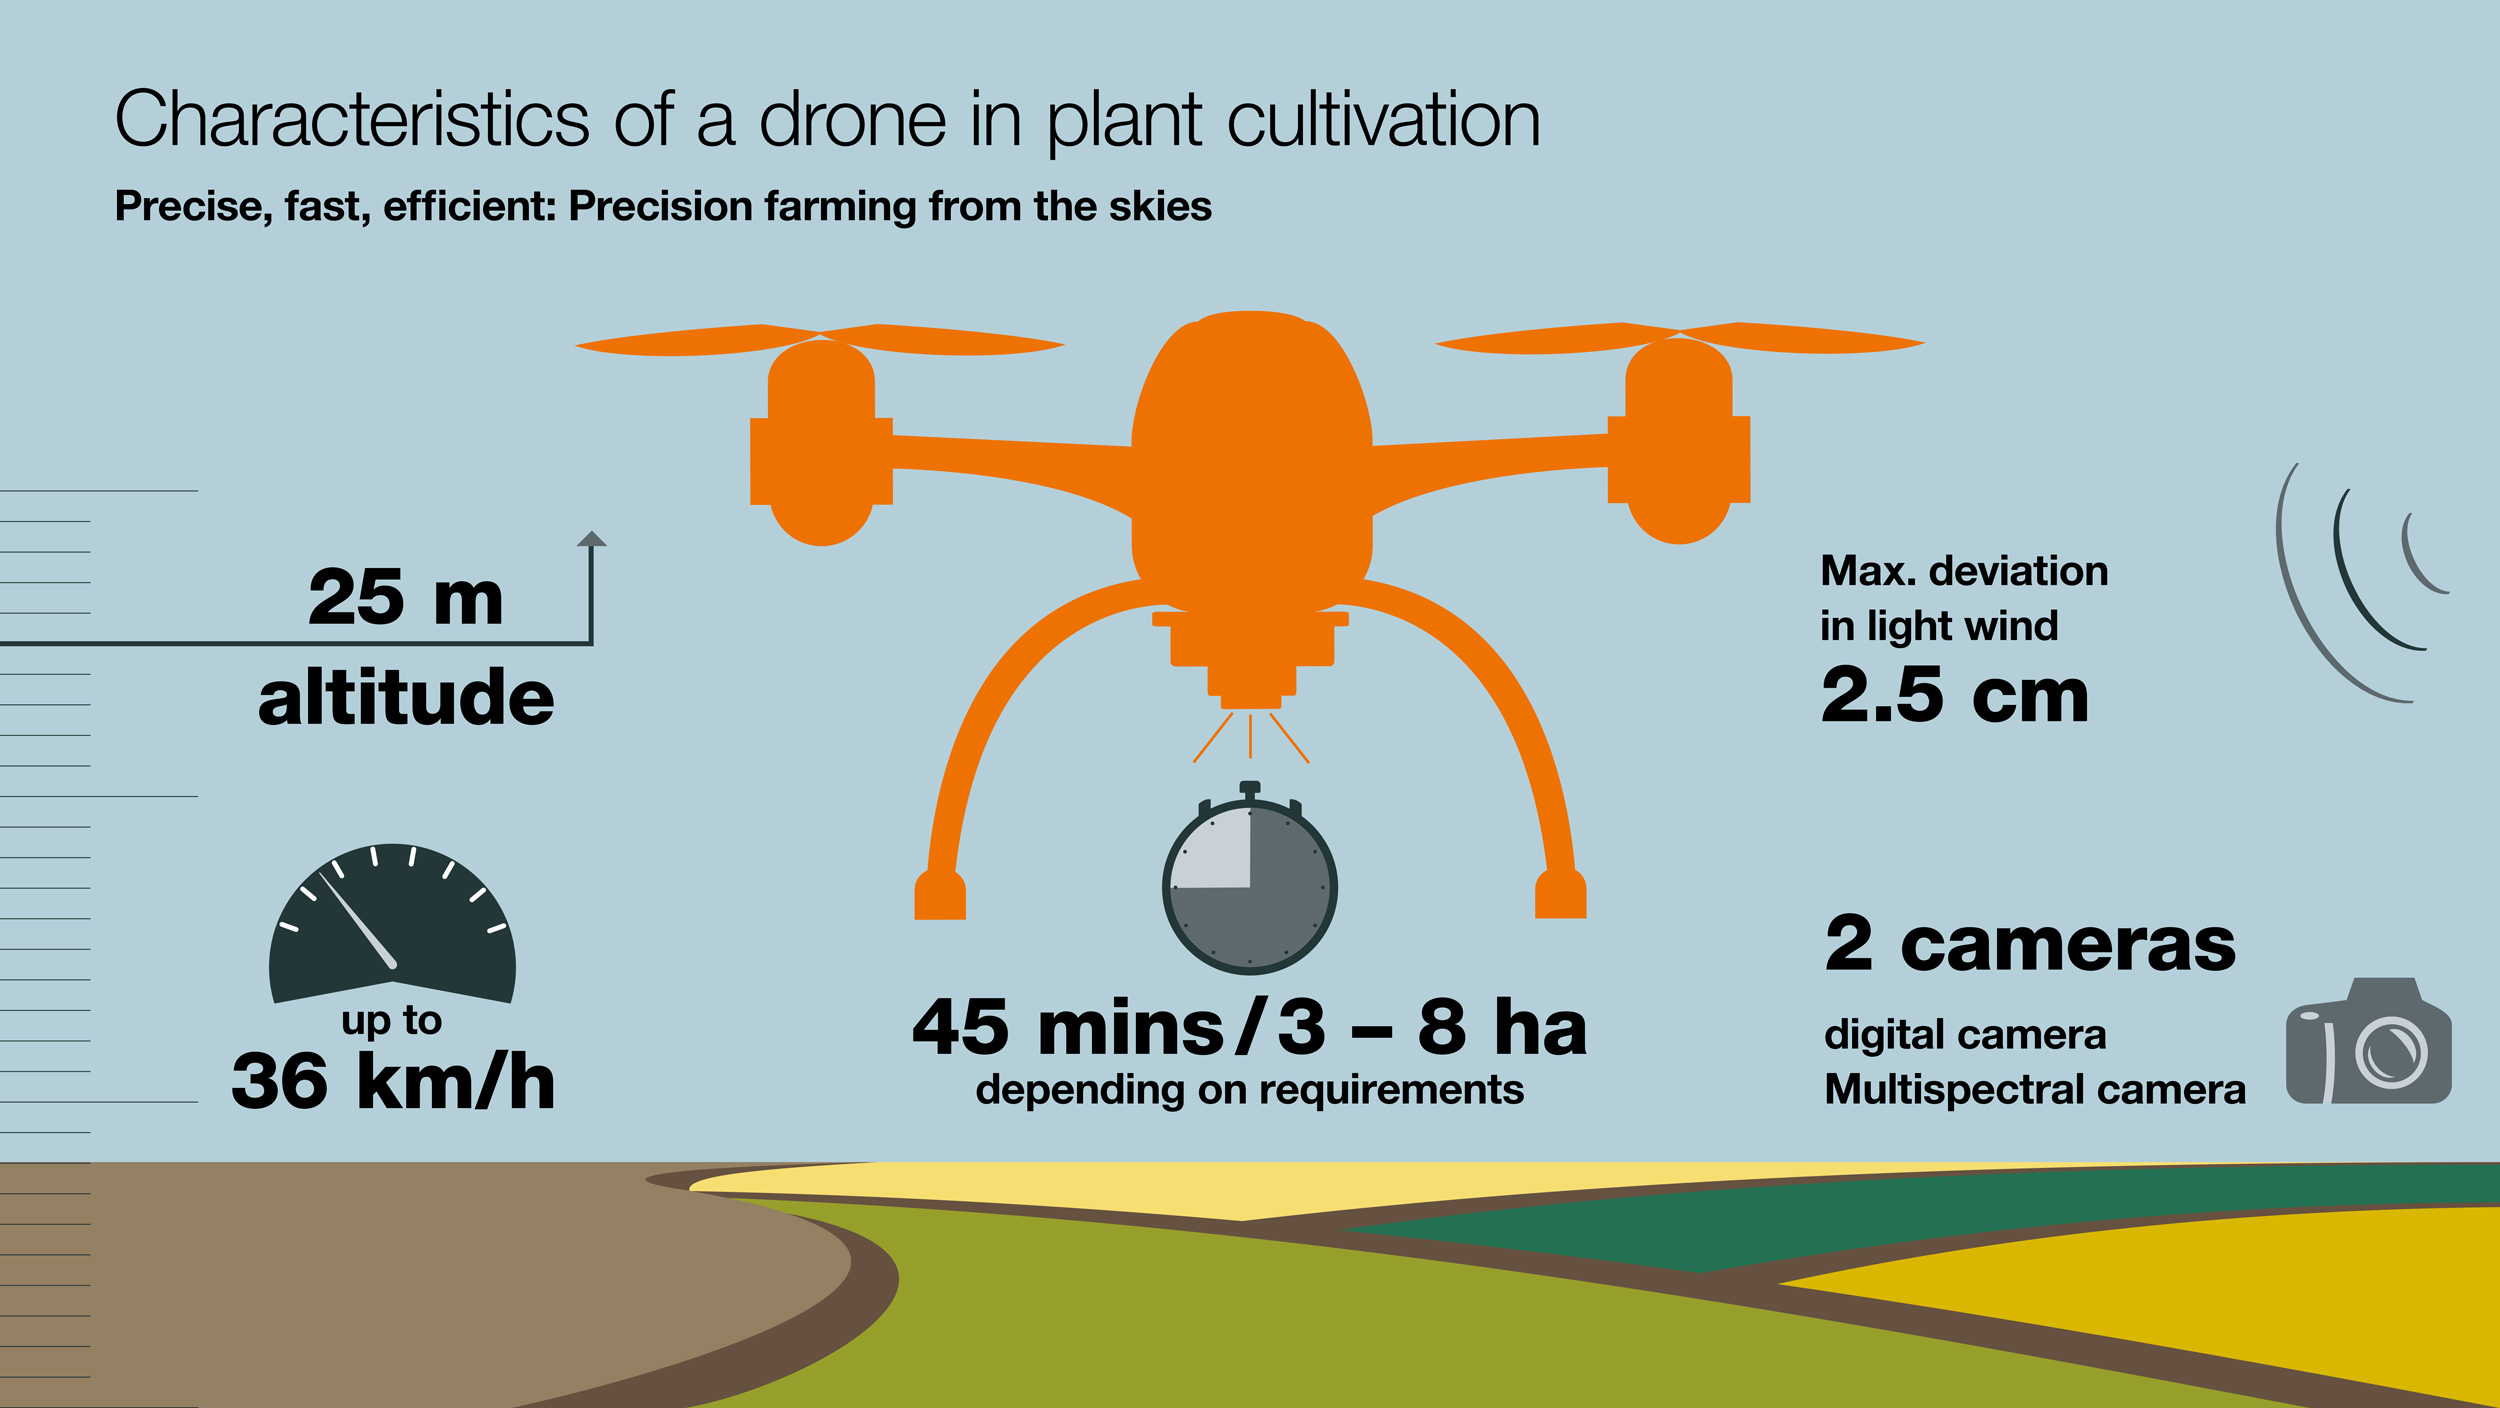 kws_wof_infographic_drone_in_plant_cultivation.jpg